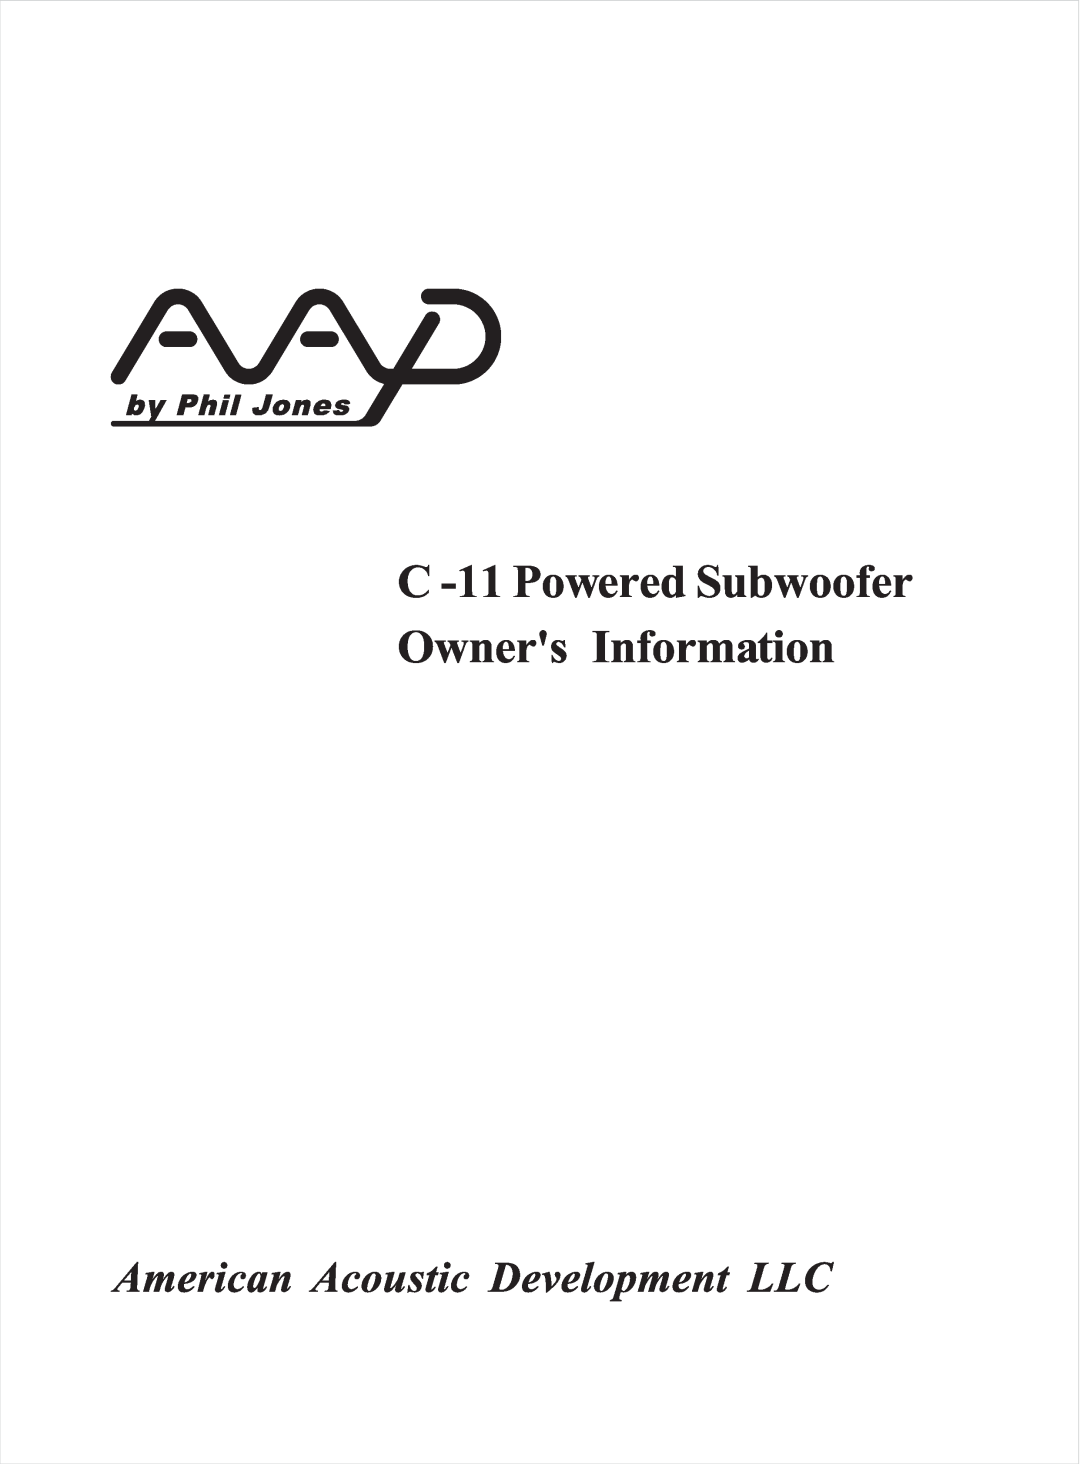 American Acoustic Development manual C -11Powered Subwoofer Owners Information 